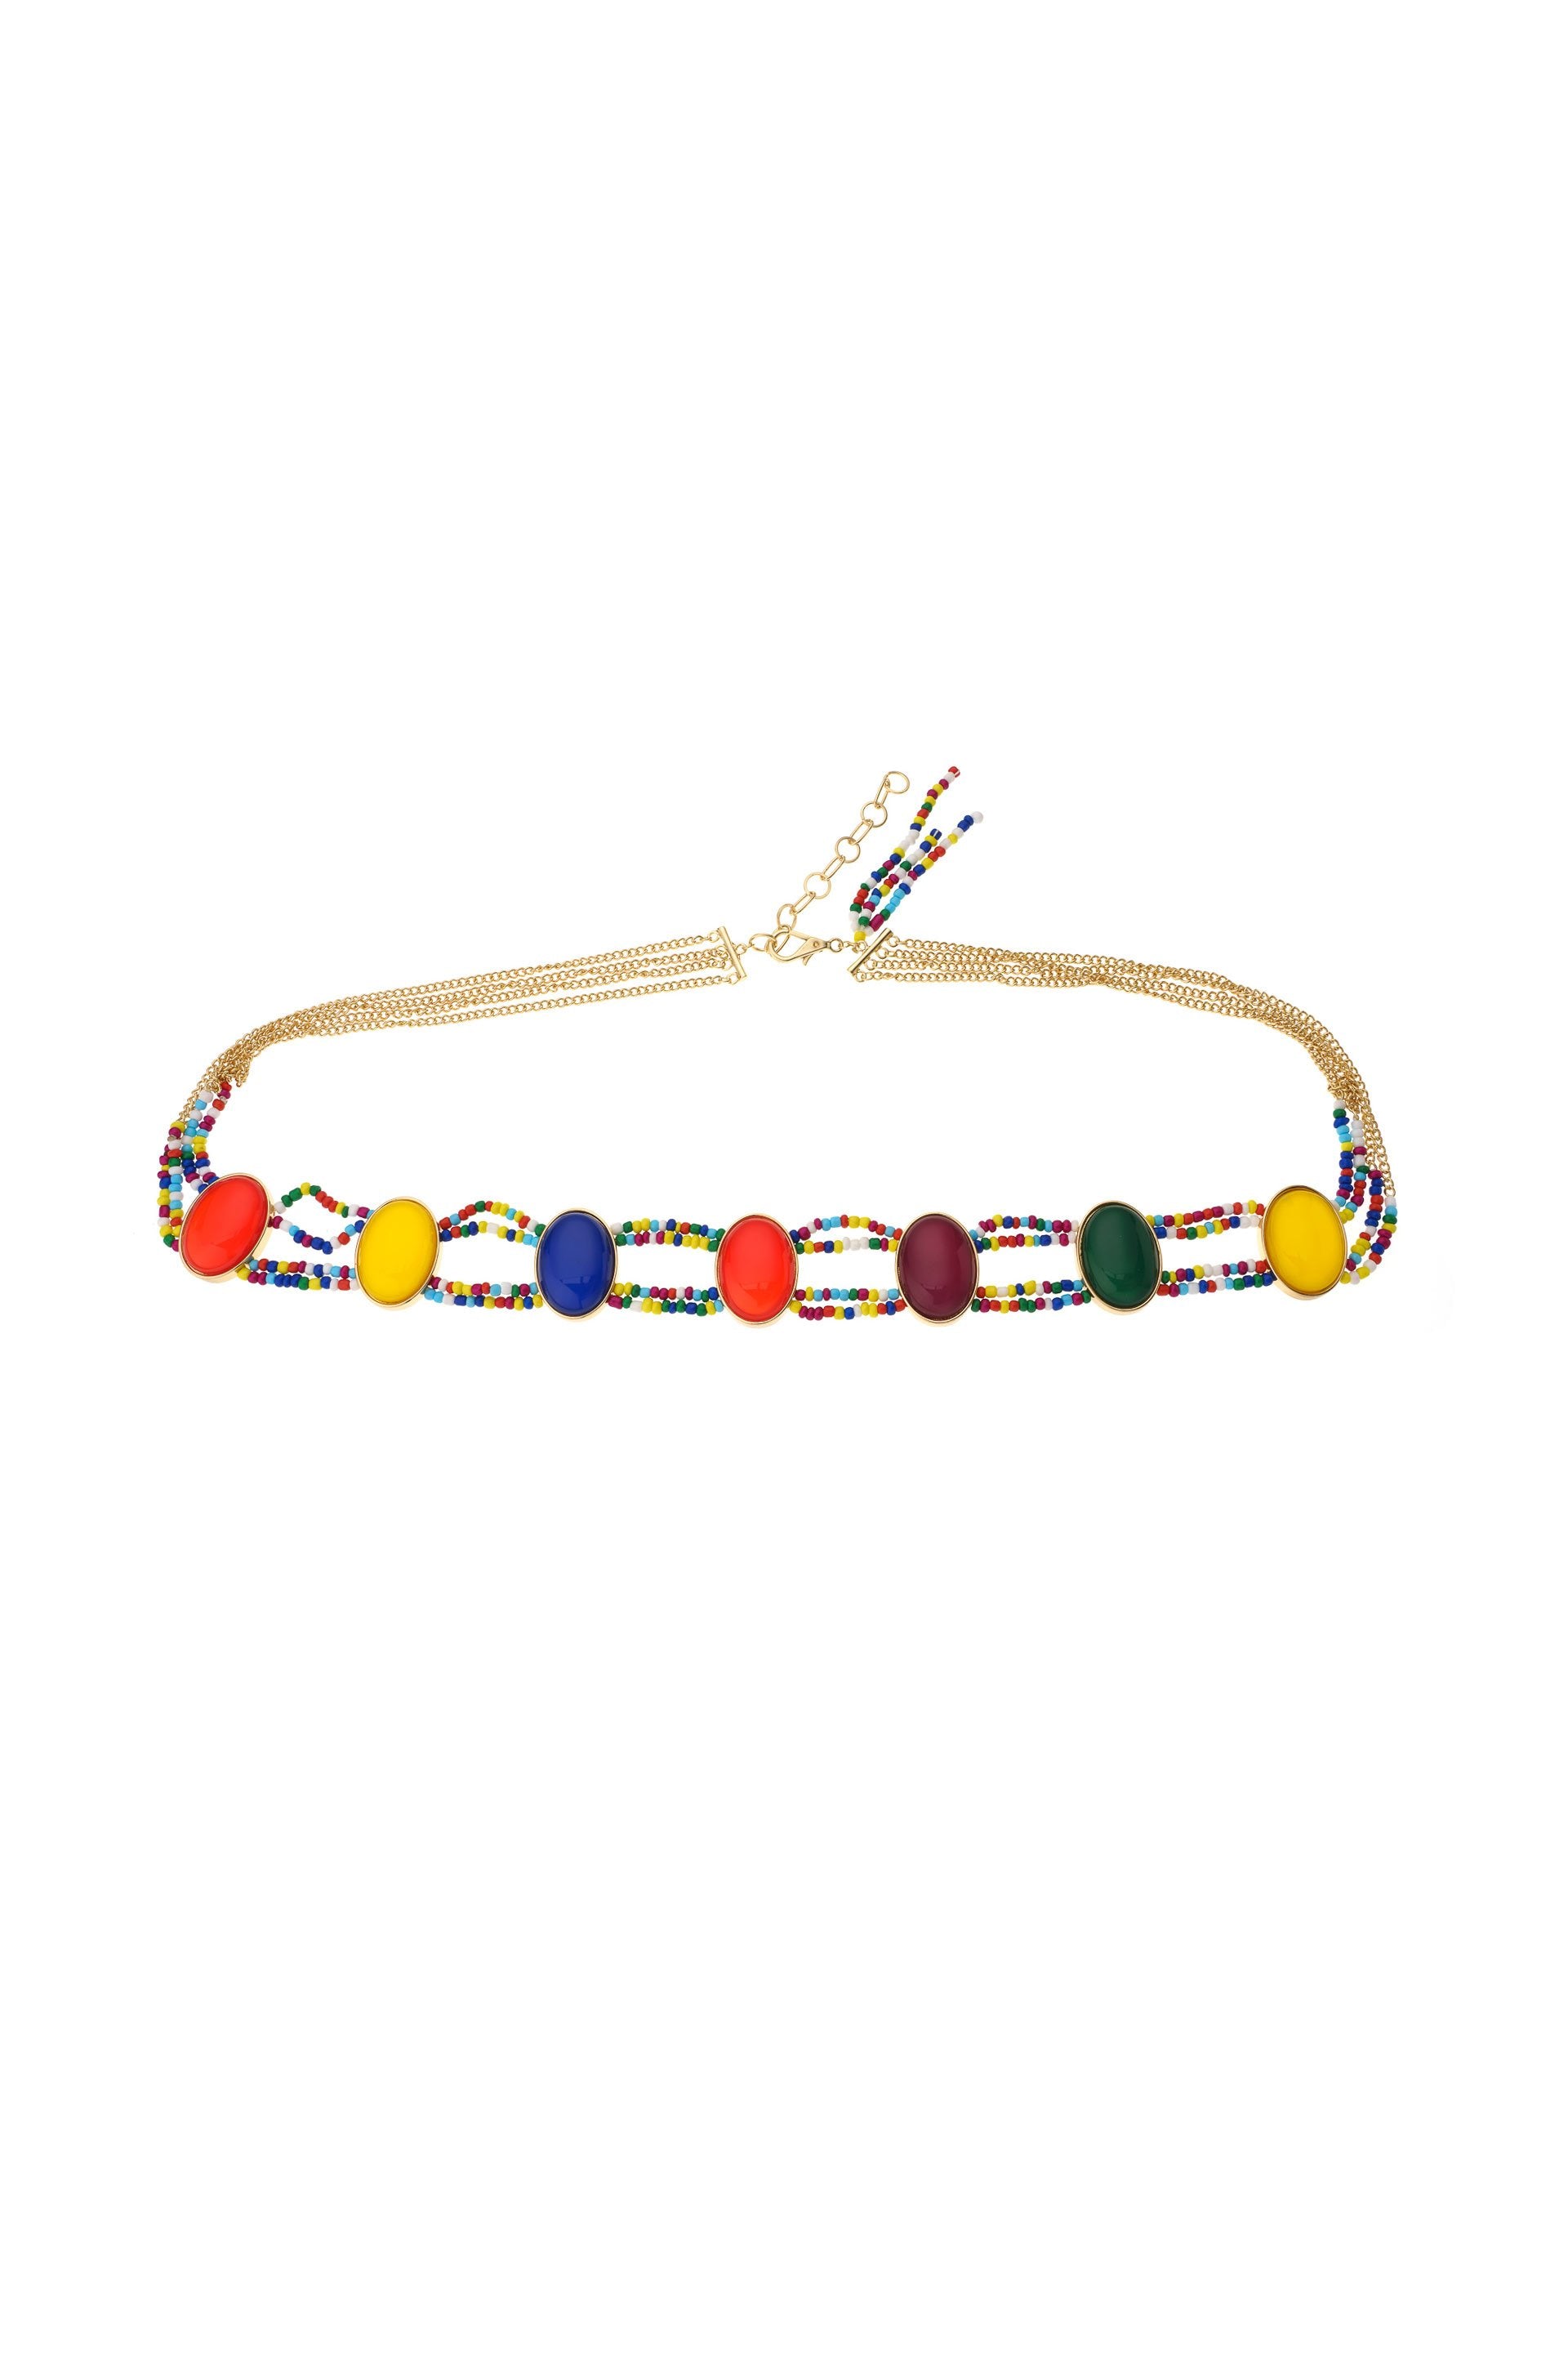 Mixed Rainbow Bead Belt in Gold on white background